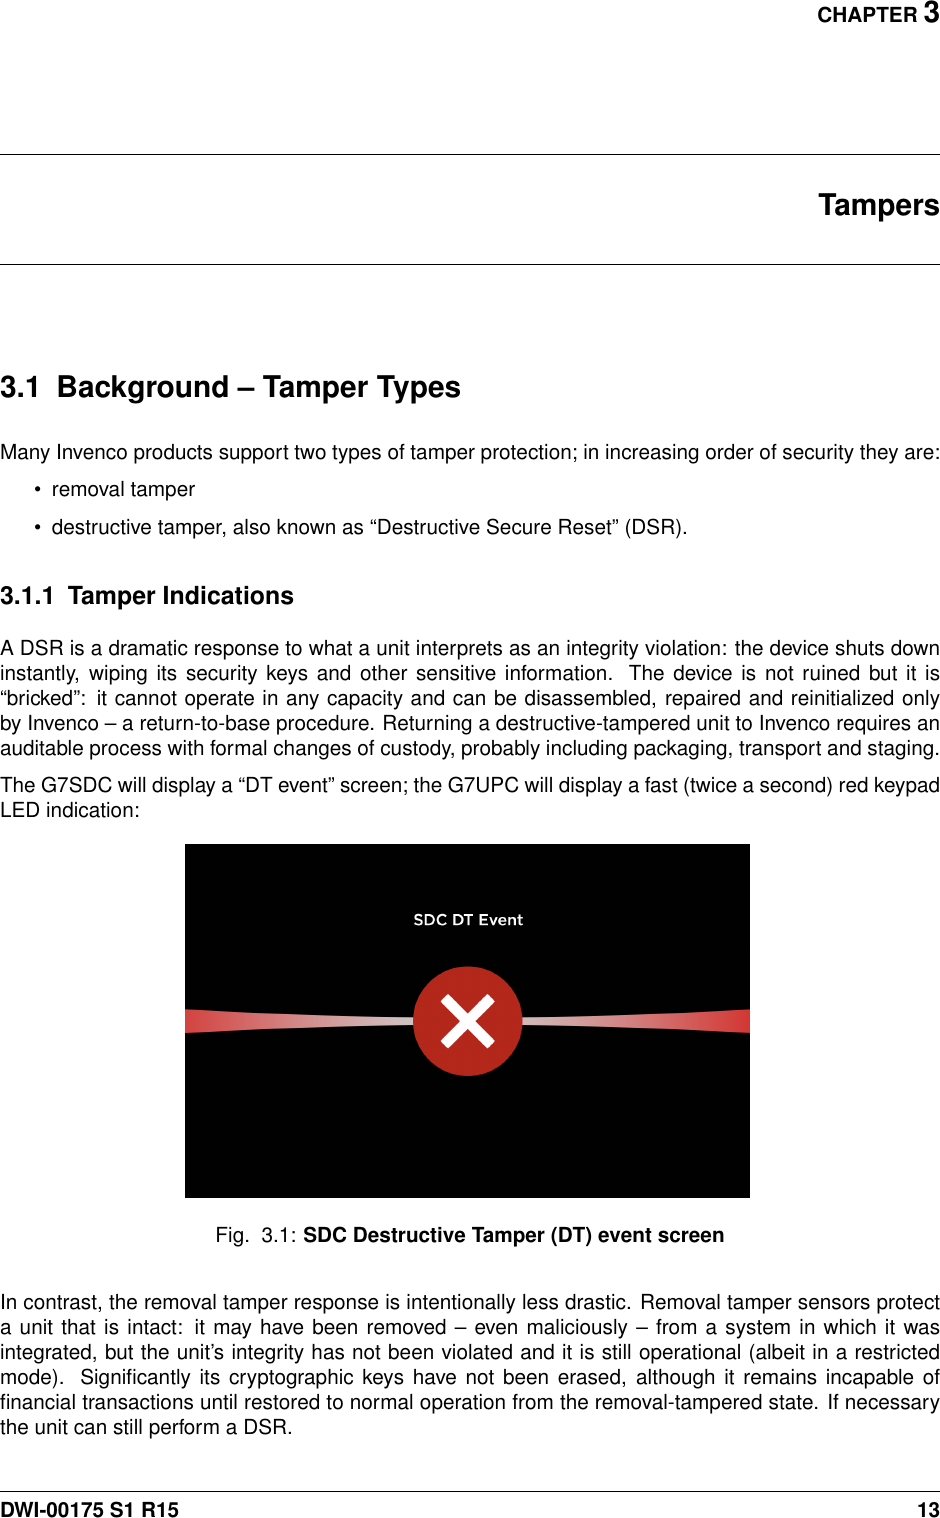 CHAPTER 3Tampers3.1 Background – Tamper TypesMany Invenco products support two types of tamper protection; in increasing order of security they are:• removal tamper• destructive tamper, also known as “Destructive Secure Reset” (DSR).3.1.1 Tamper IndicationsA DSR is a dramatic response to what a unit interprets as an integrity violation: the device shuts downinstantly, wiping its security keys and other sensitive information. The device is not ruined but it is“bricked”: it cannot operate in any capacity and can be disassembled, repaired and reinitialized onlyby Invenco – a return-to-base procedure. Returning a destructive-tampered unit to Invenco requires anauditable process with formal changes of custody, probably including packaging, transport and staging.The G7SDC will display a “DT event” screen; the G7UPC will display a fast (twice a second) red keypadLED indication:Fig. 3.1: SDC Destructive Tamper (DT) event screenIn contrast, the removal tamper response is intentionally less drastic. Removal tamper sensors protecta unit that is intact: it may have been removed – even maliciously – from a system in which it wasintegrated, but the unit’s integrity has not been violated and it is still operational (albeit in a restrictedmode). Signiﬁcantly its cryptographic keys have not been erased, although it remains incapable ofﬁnancial transactions until restored to normal operation from the removal-tampered state. If necessarythe unit can still perform a DSR.DWI-00175 S1 R15 13